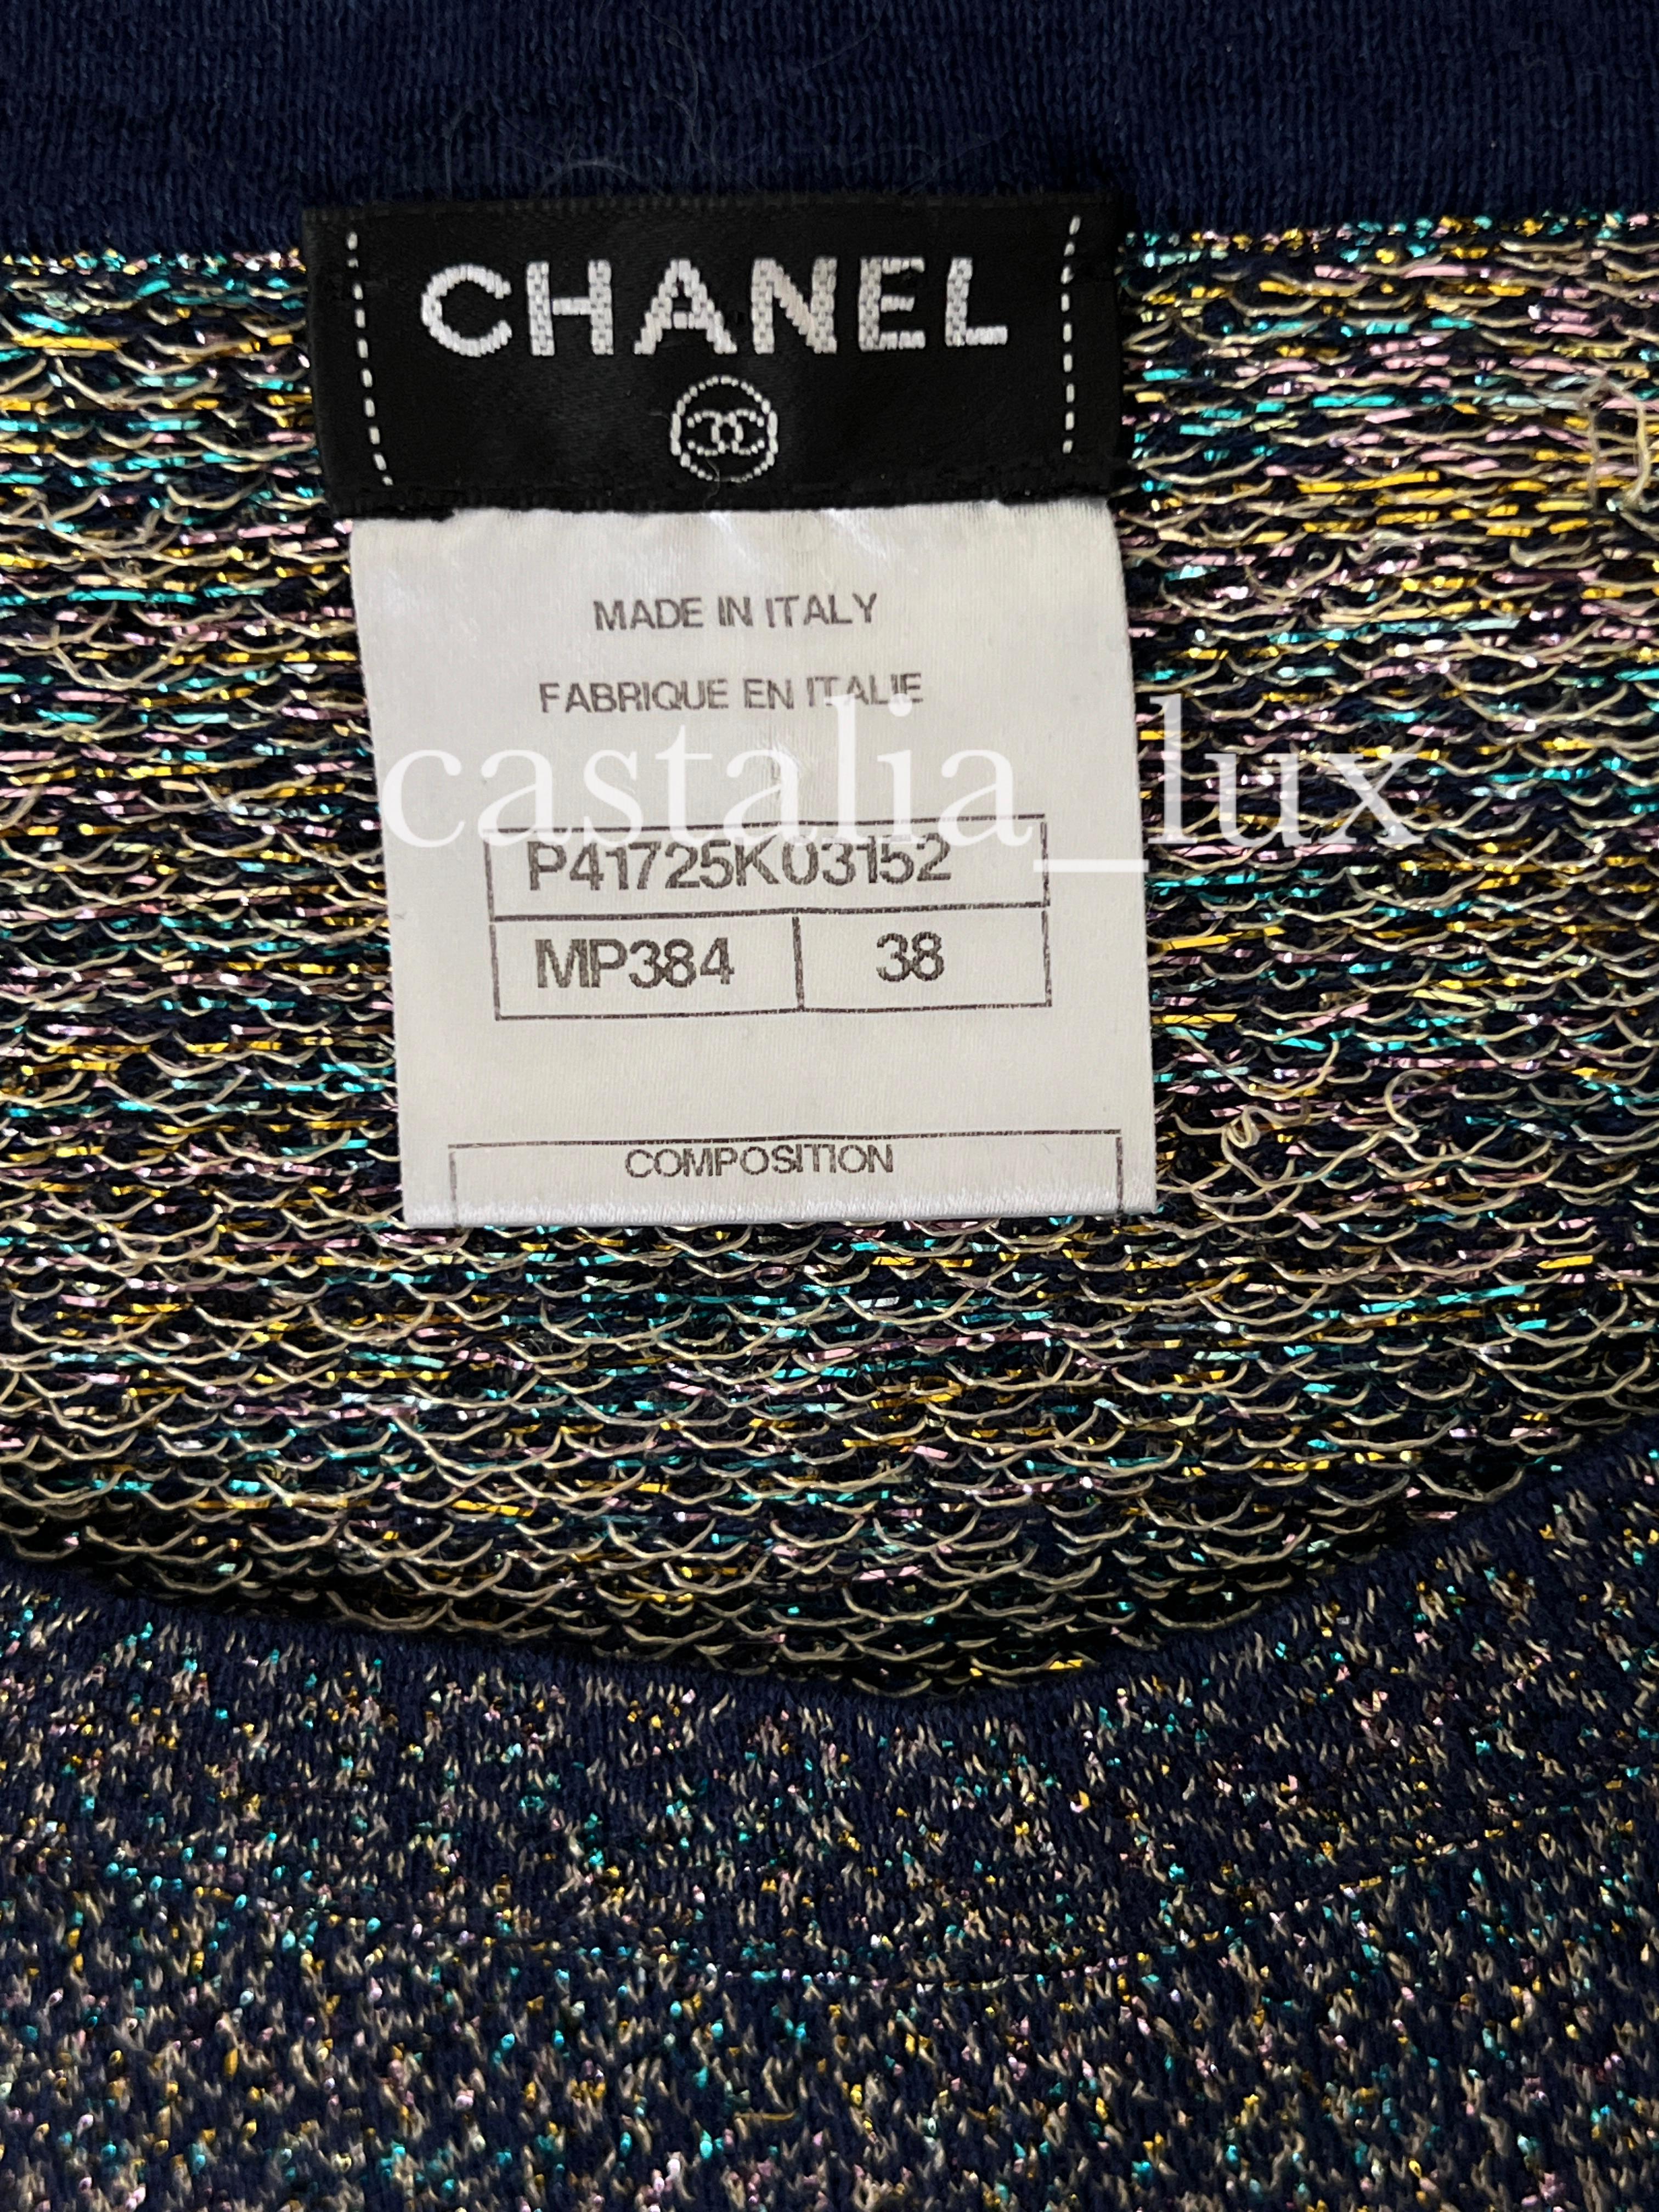 Chanel New Paris / Byzance Shimmer Cashmere Dress For Sale 2